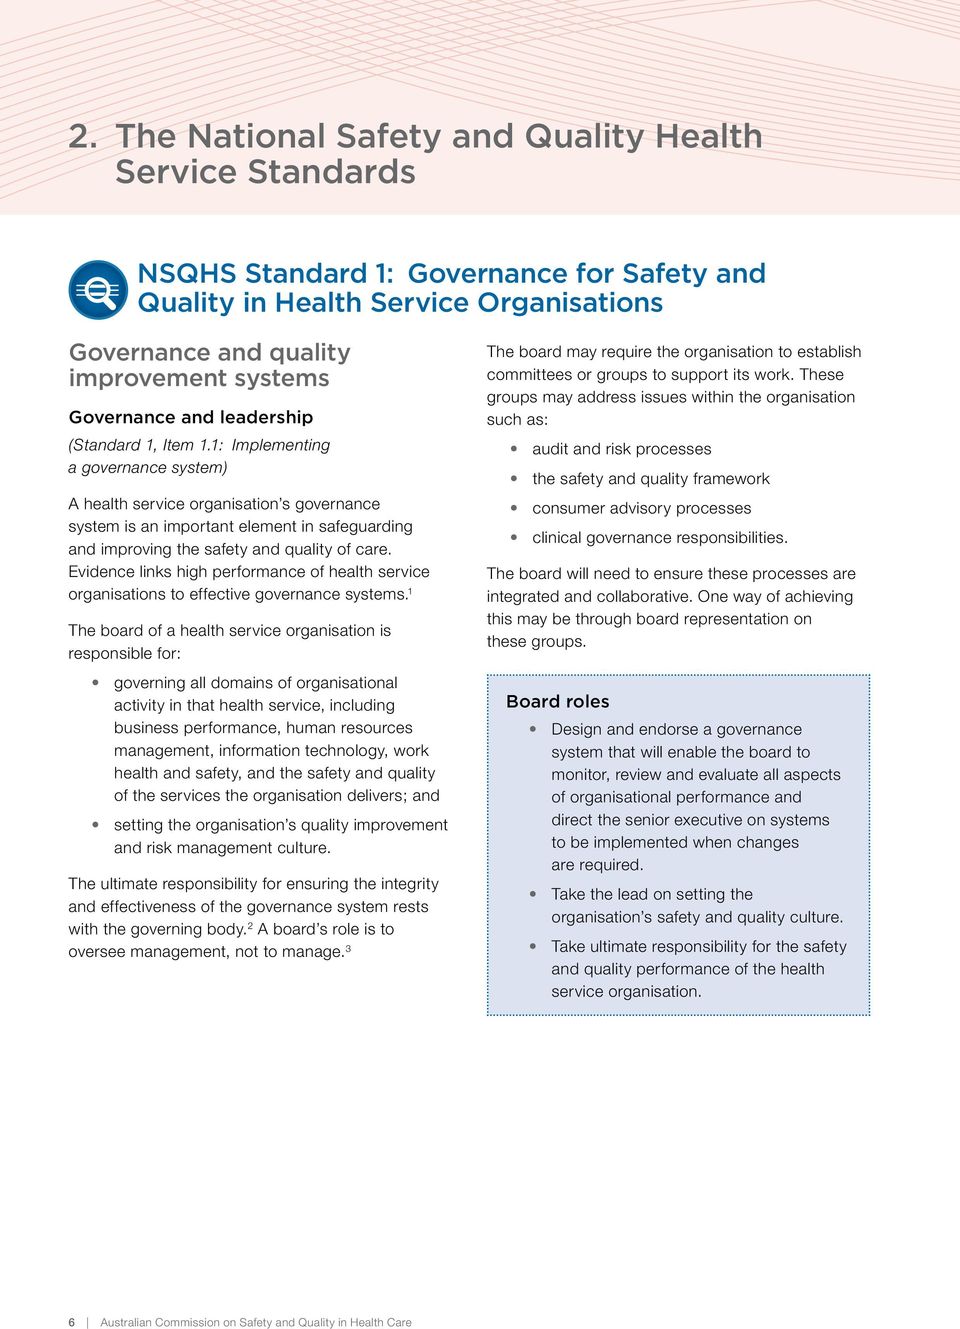 1: Implementing a governance system) A health service organisation s governance system is an important element in safeguarding and improving the safety and quality of care.